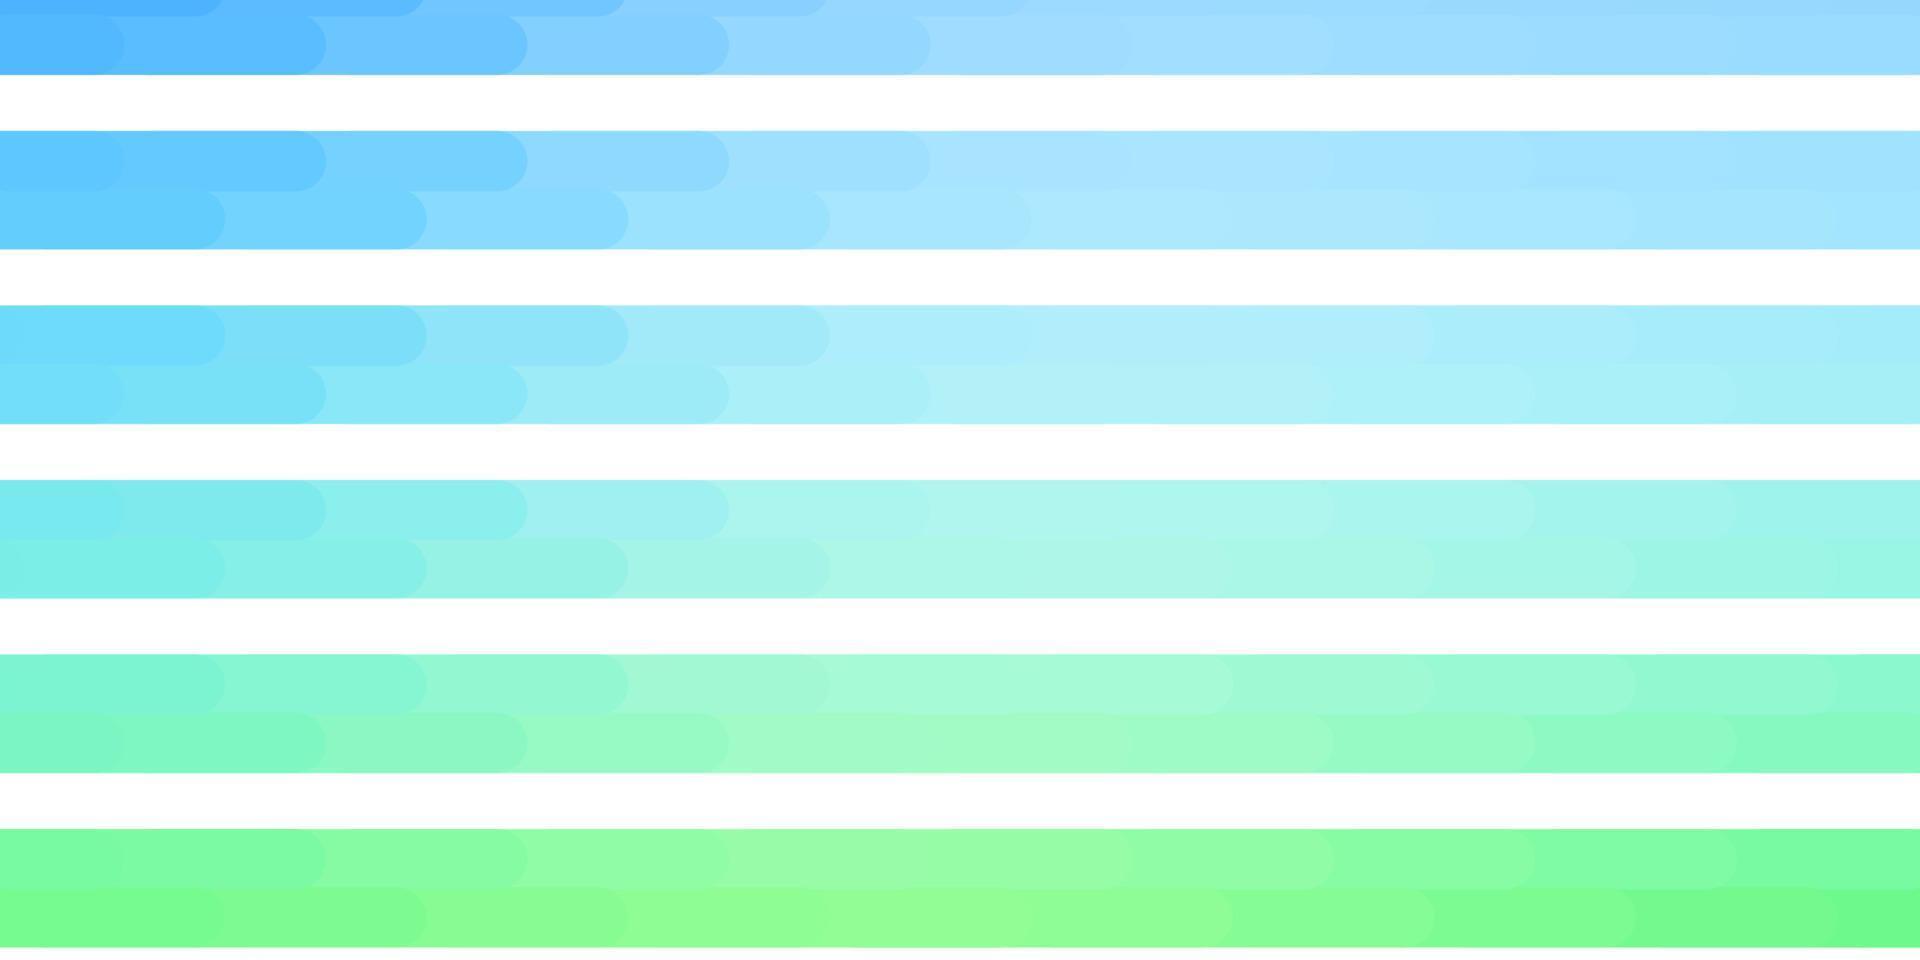 Light Blue, Green vector backdrop with lines.